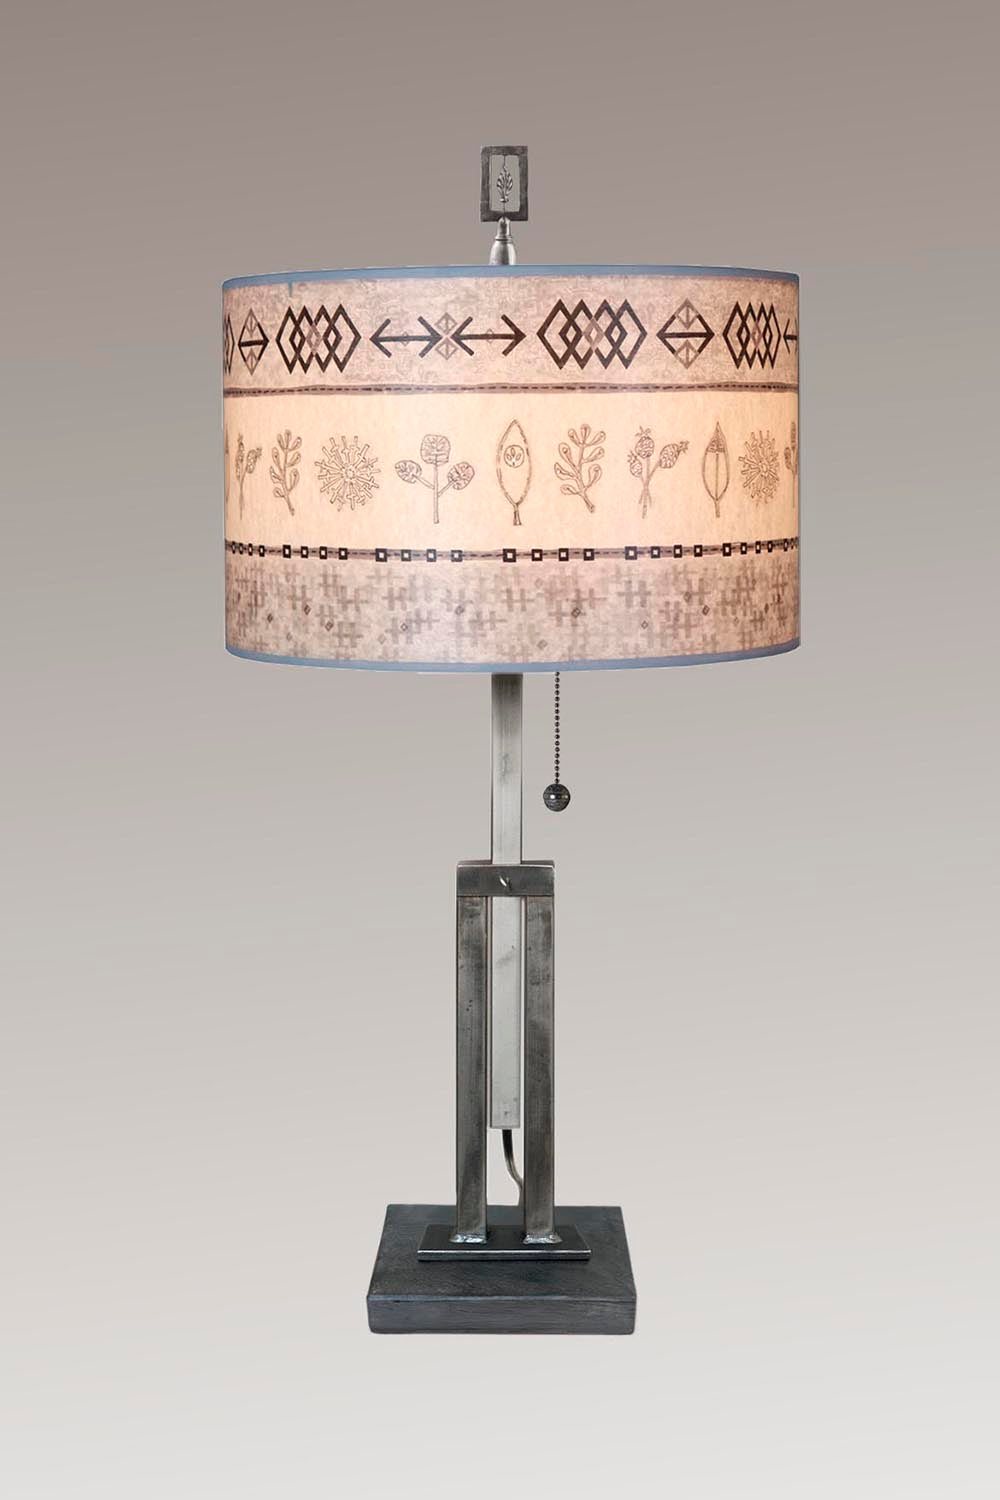 Janna Ugone & Co Table Lamps Adjustable-Height Steel Table Lamp with Large Drum Shade in Wovens & Spring in Mist